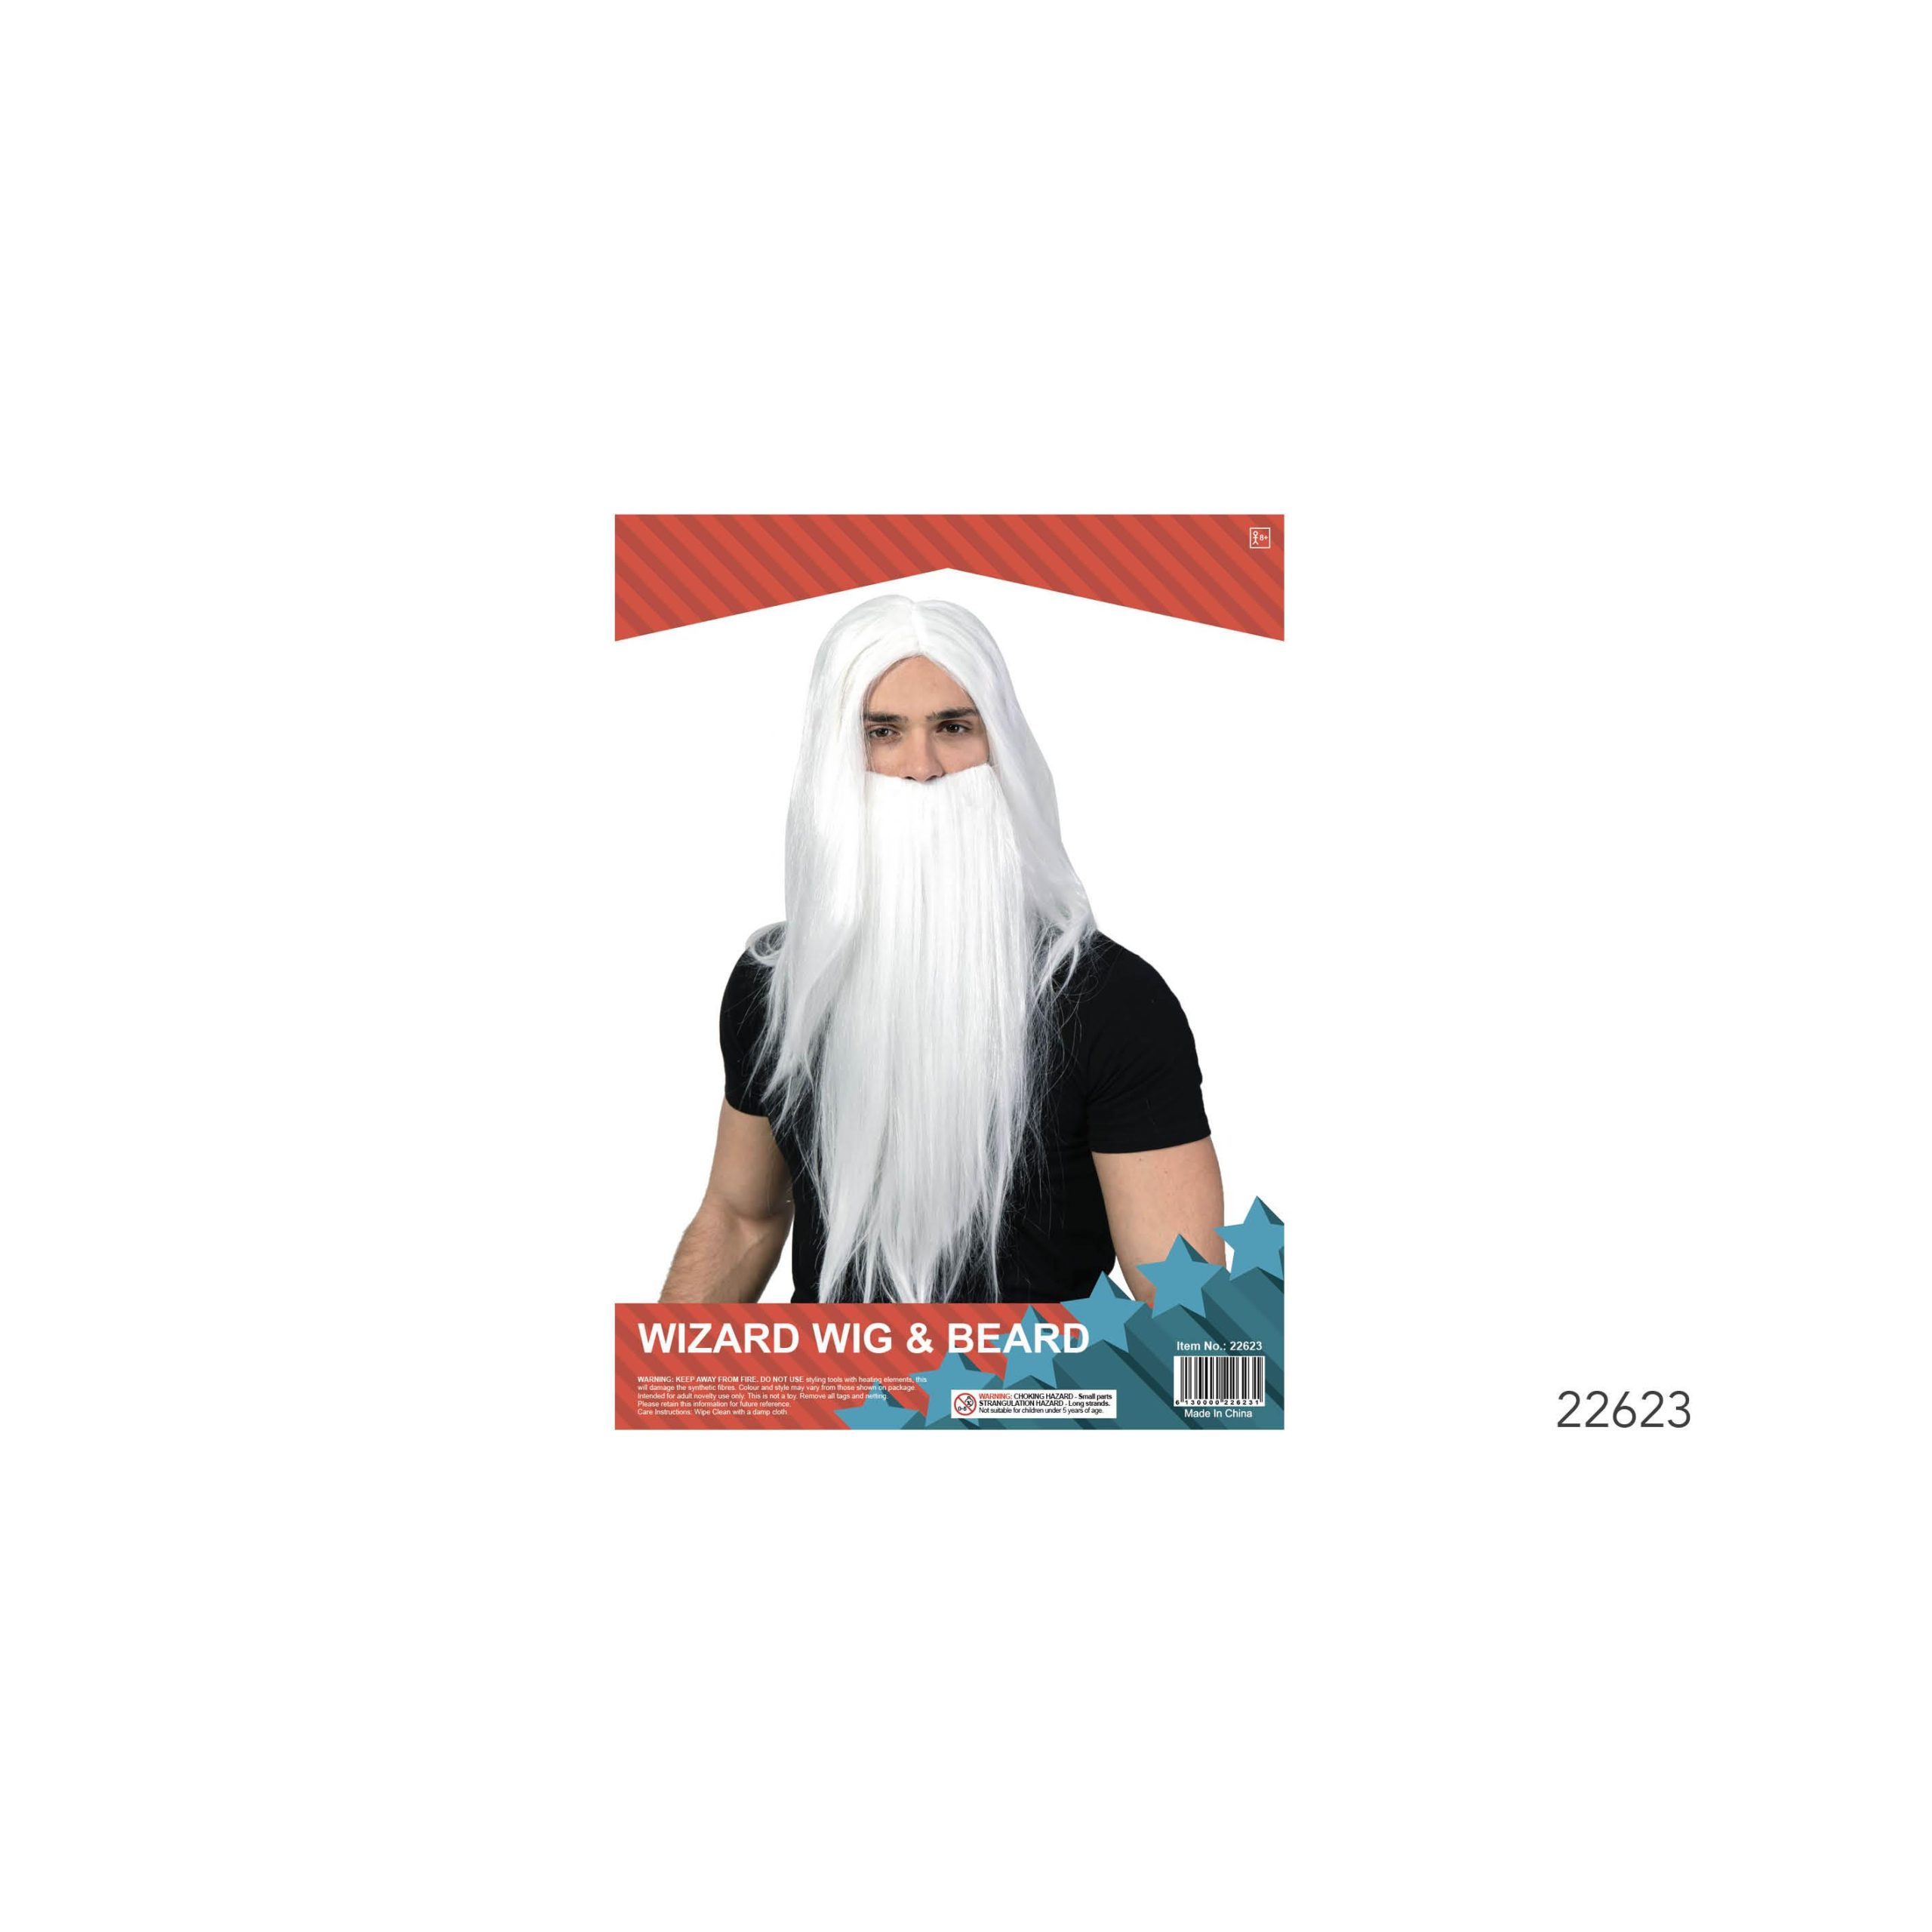 Wizard Wig and Beard – Events, Book Week (PGE-09667)